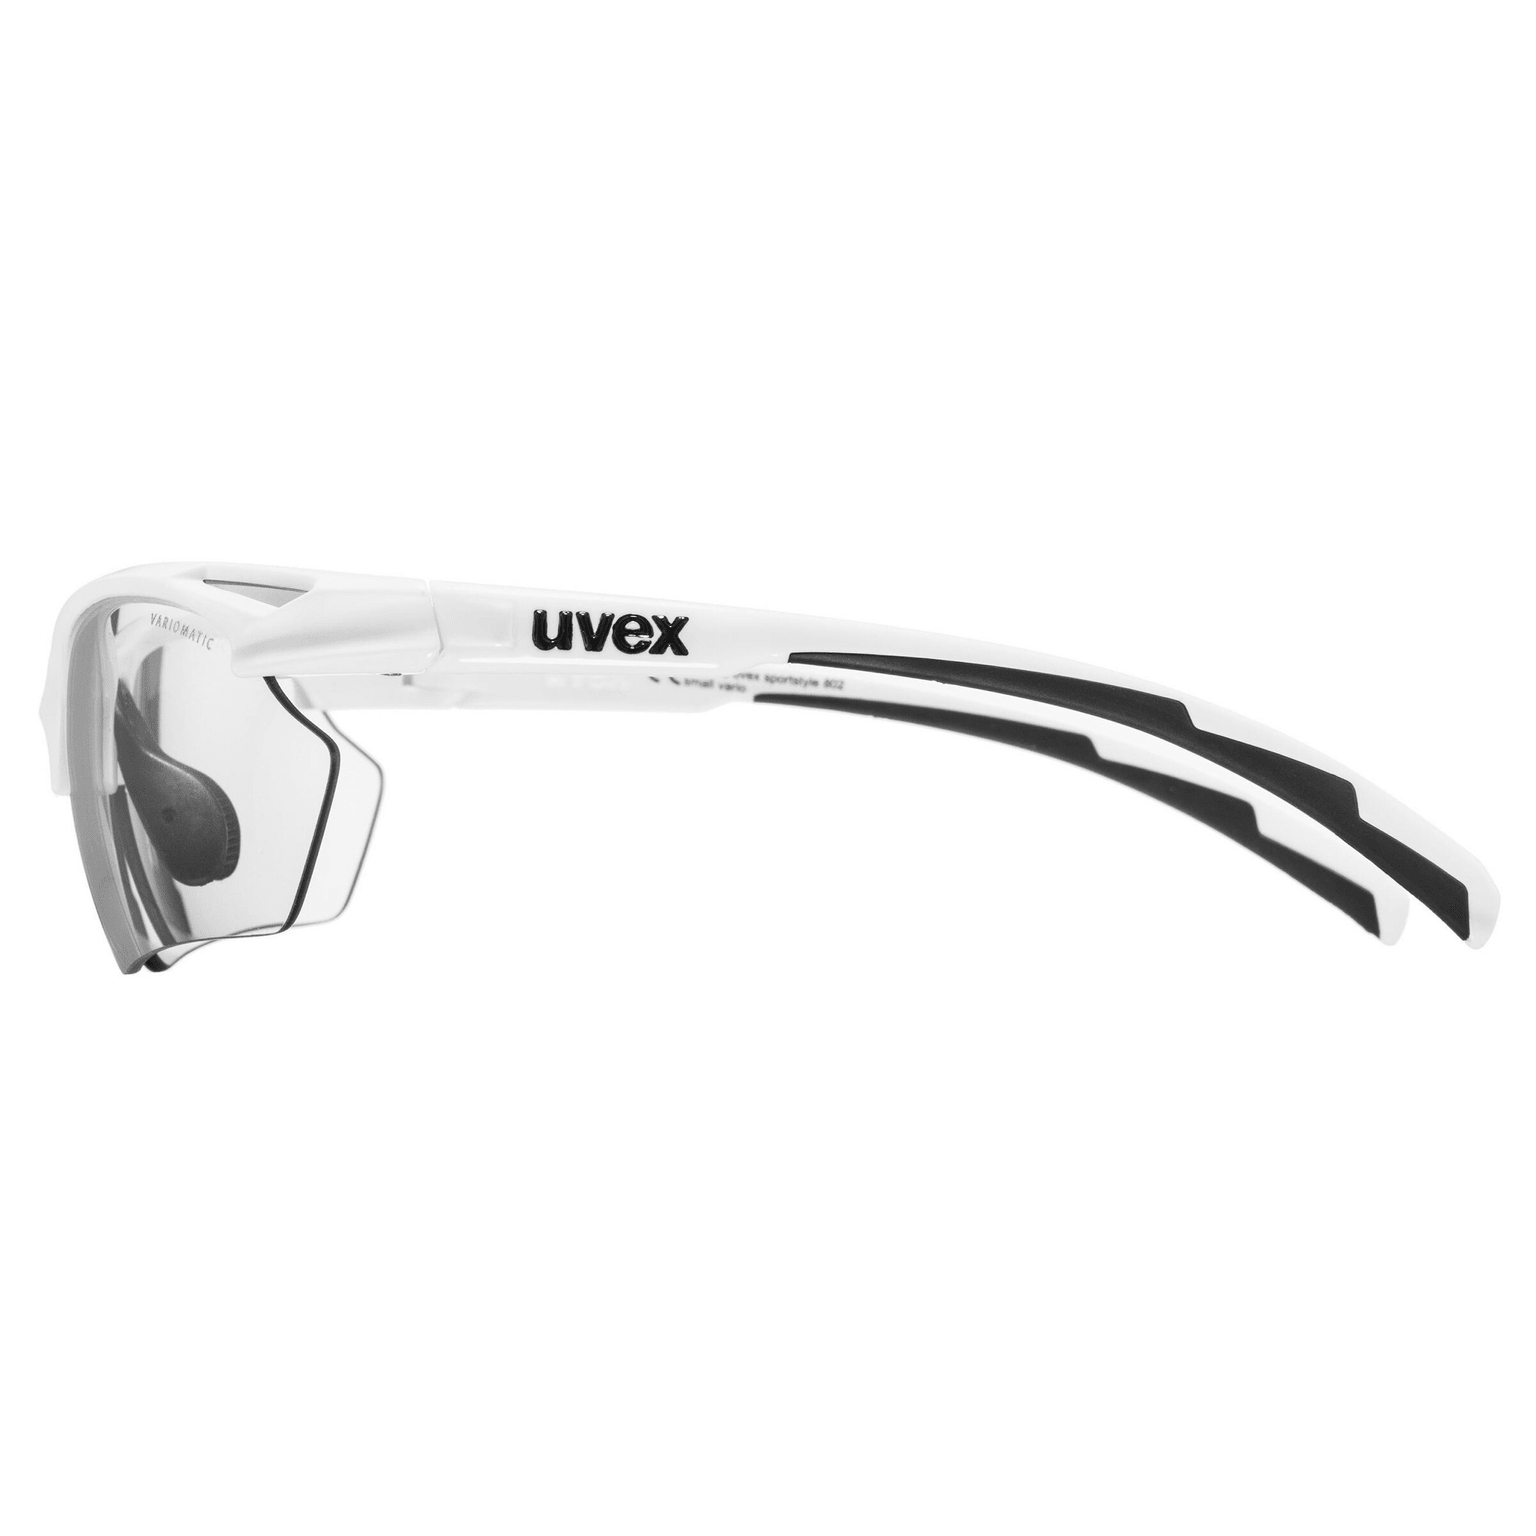 Uvex Uvex Sportstyle 802 V small Sportbrille weiss 8